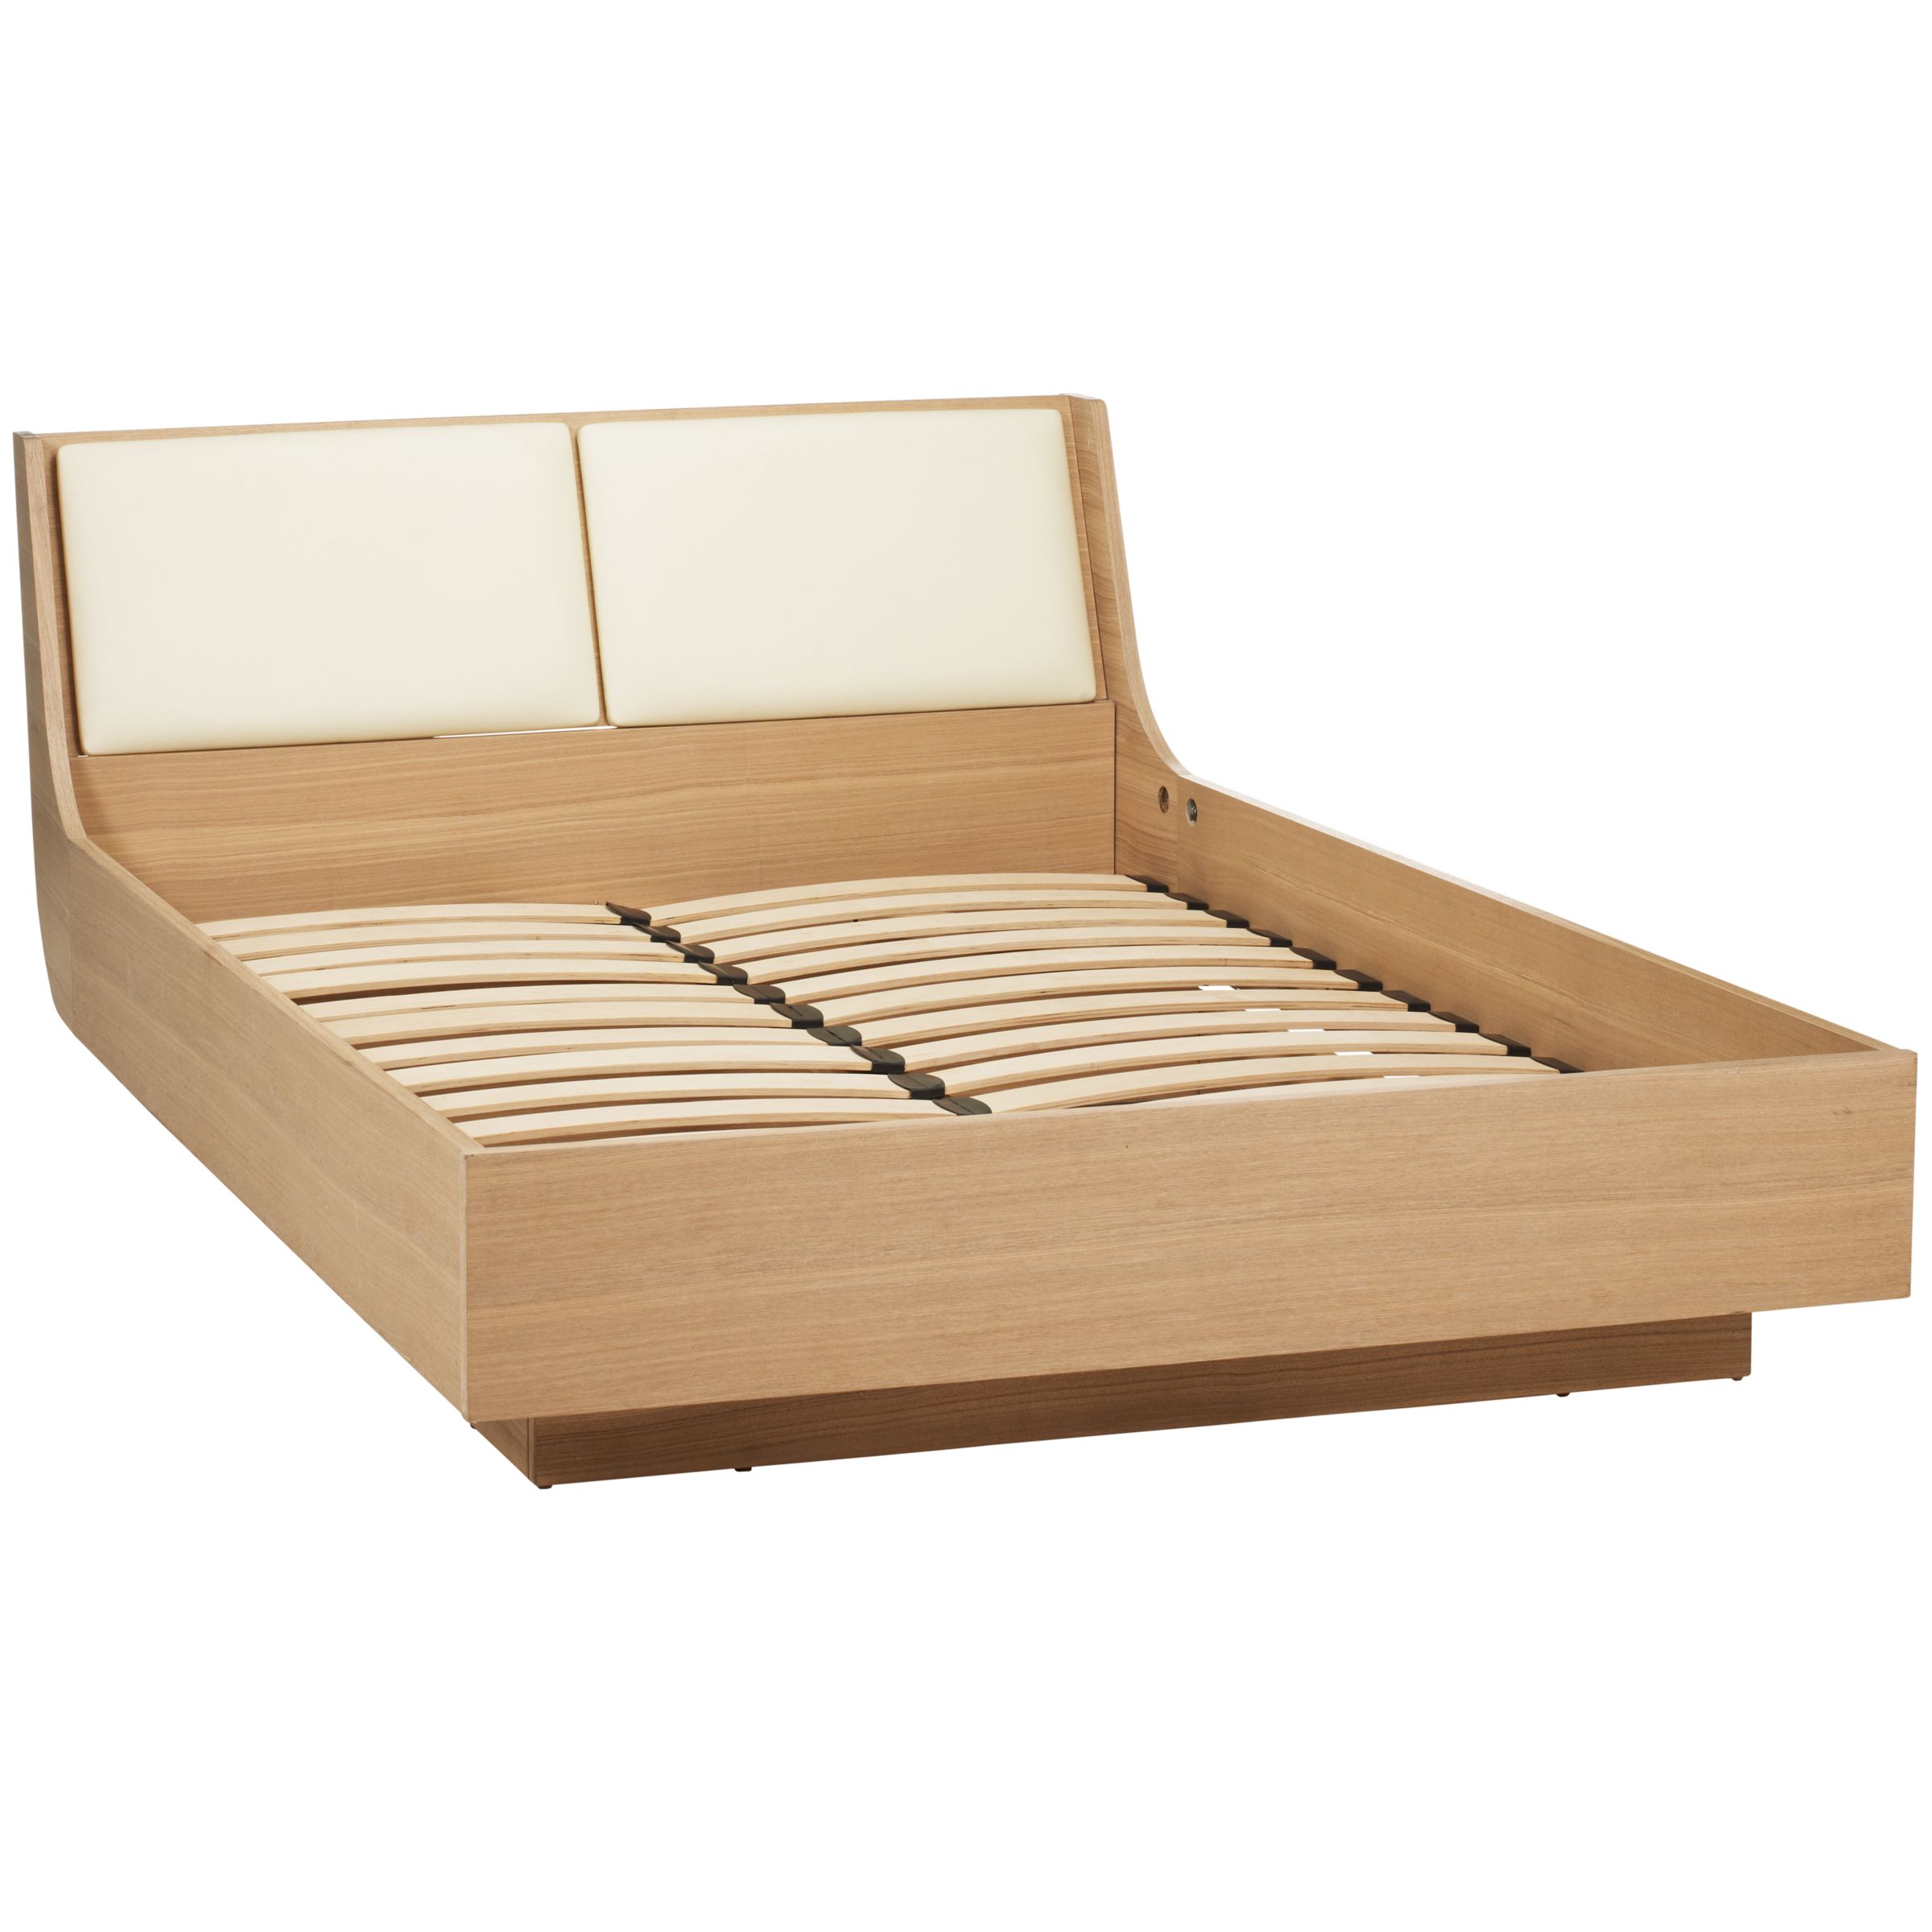 Pacific Bedstead, Ash, Double